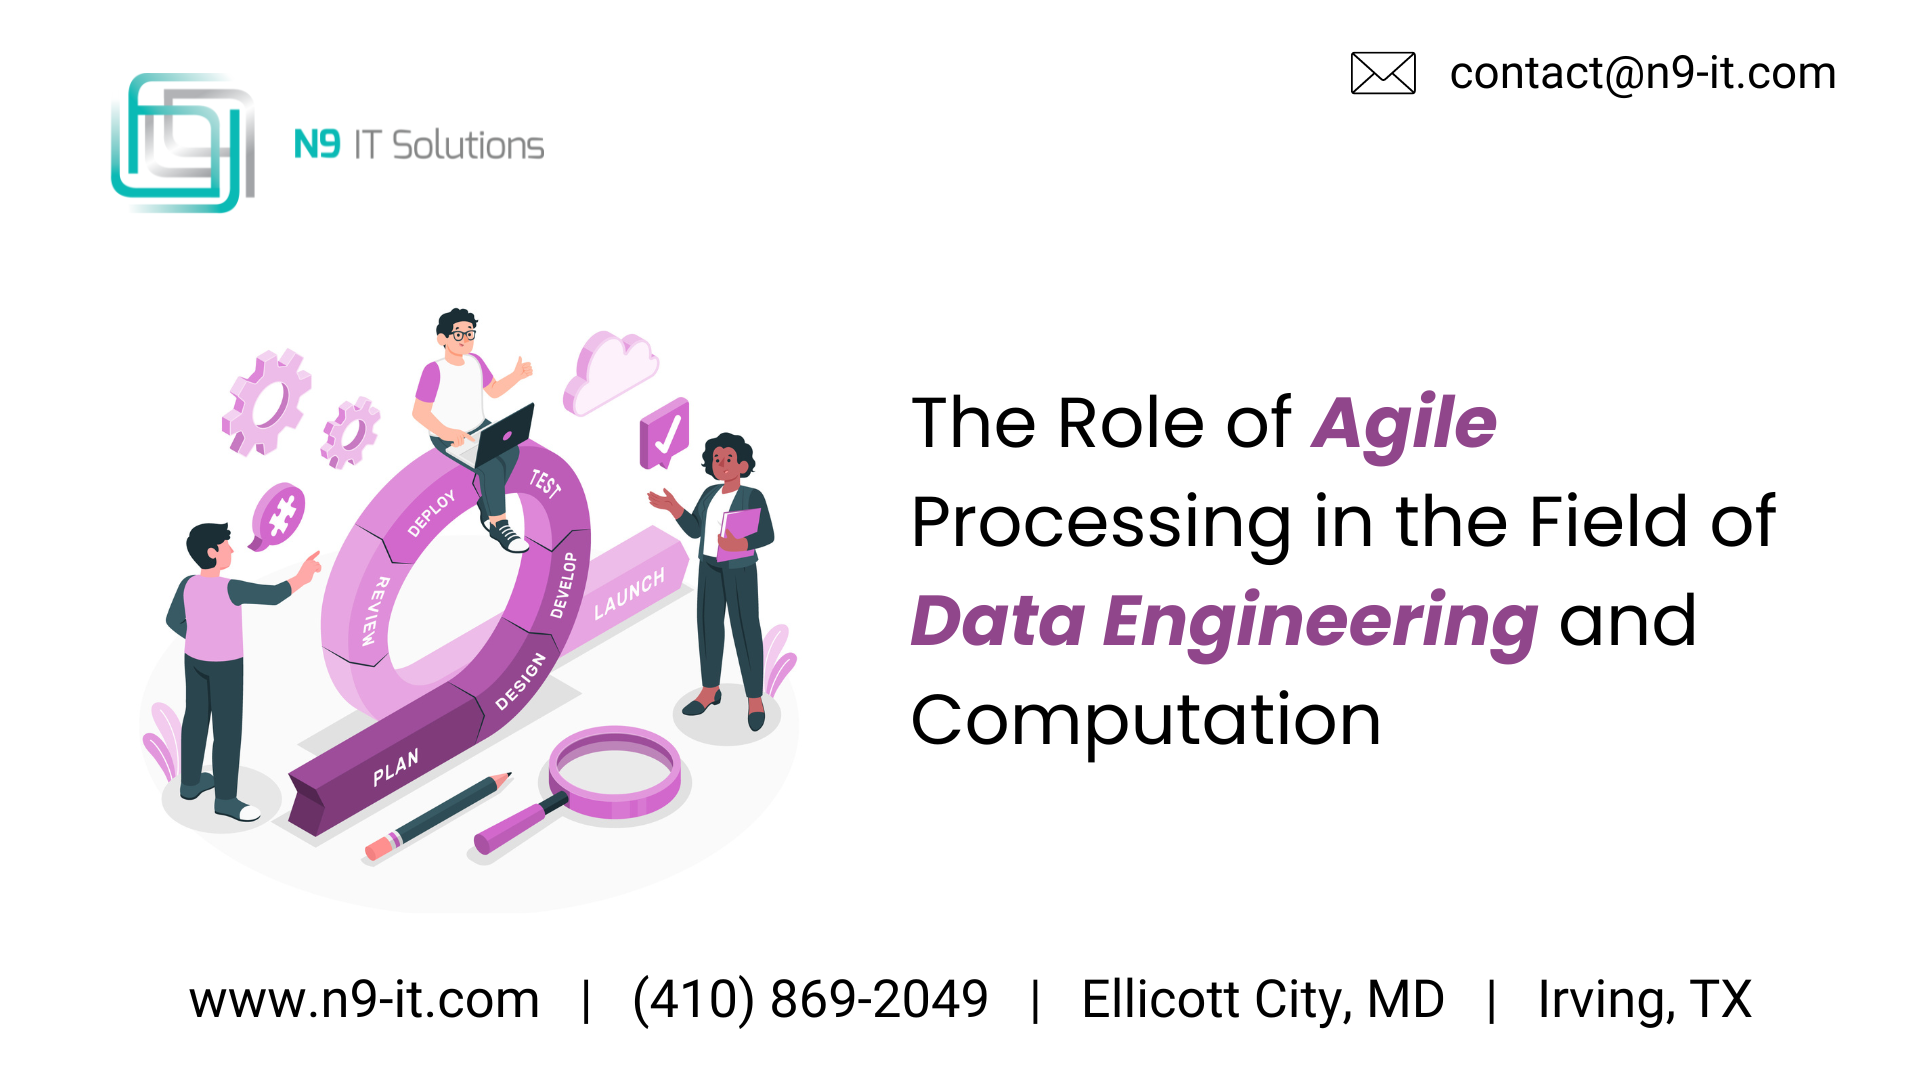 The Role of Agile Processing in the Field of Data Engineering and Computation